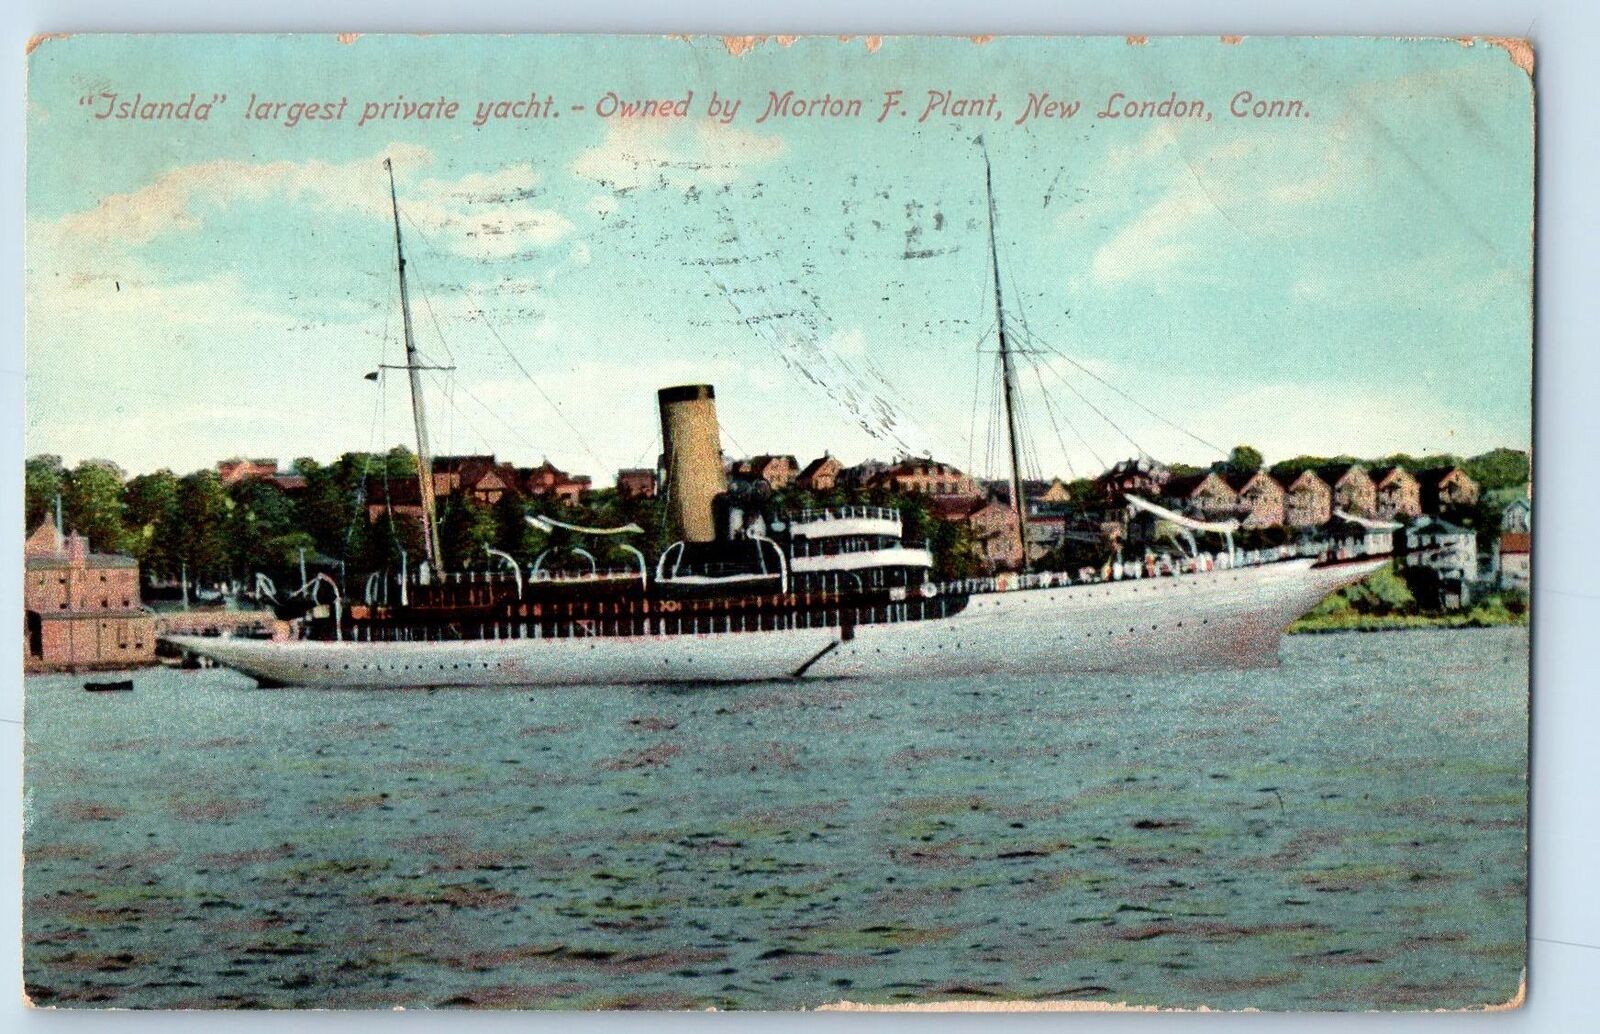 1909 Islanda Largest Private Yacht Owned MF Plant New London Connecticut Postcar